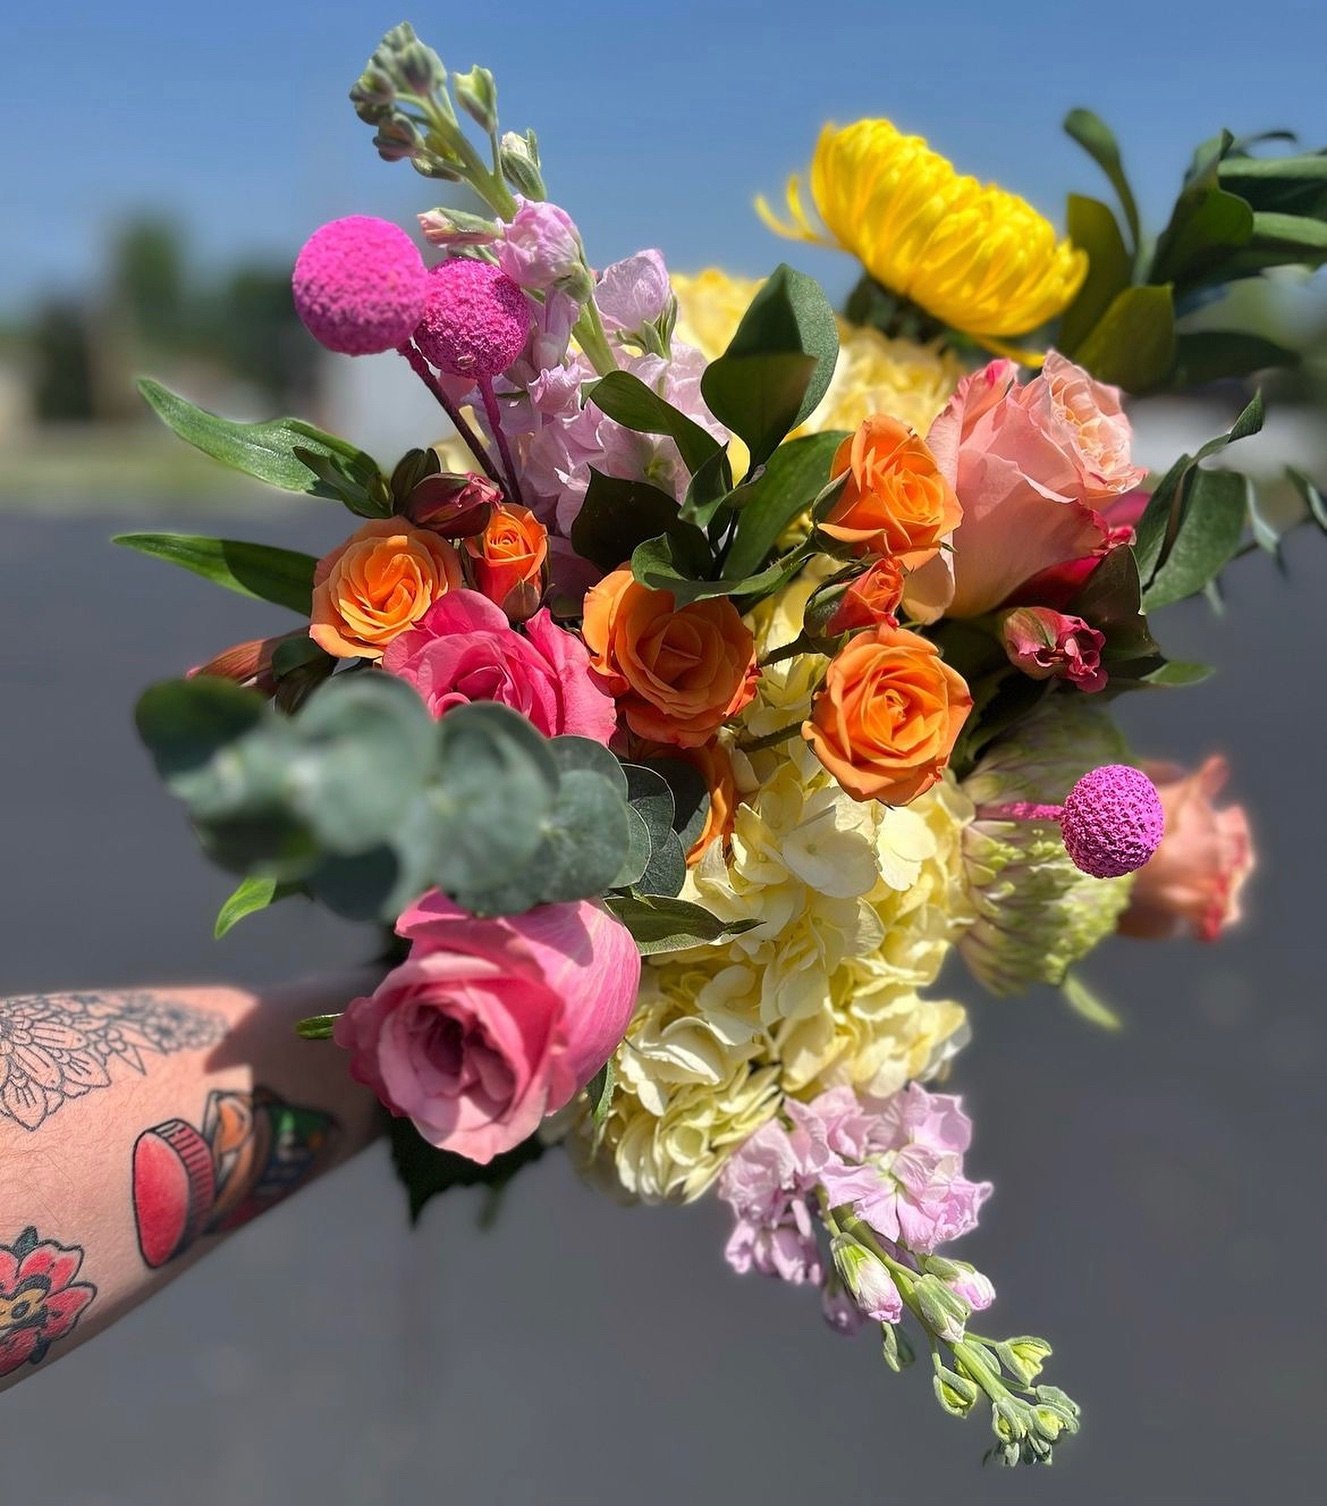 Make Mom feel extra special this Mother&rsquo;s Day with a beautiful bouquet from The Flower Daddy! 💐🌸 

Spoil her with hand-picked blooms that are sure to put a smile on her face. Order now and show your love and appreciation for the amazing mothe